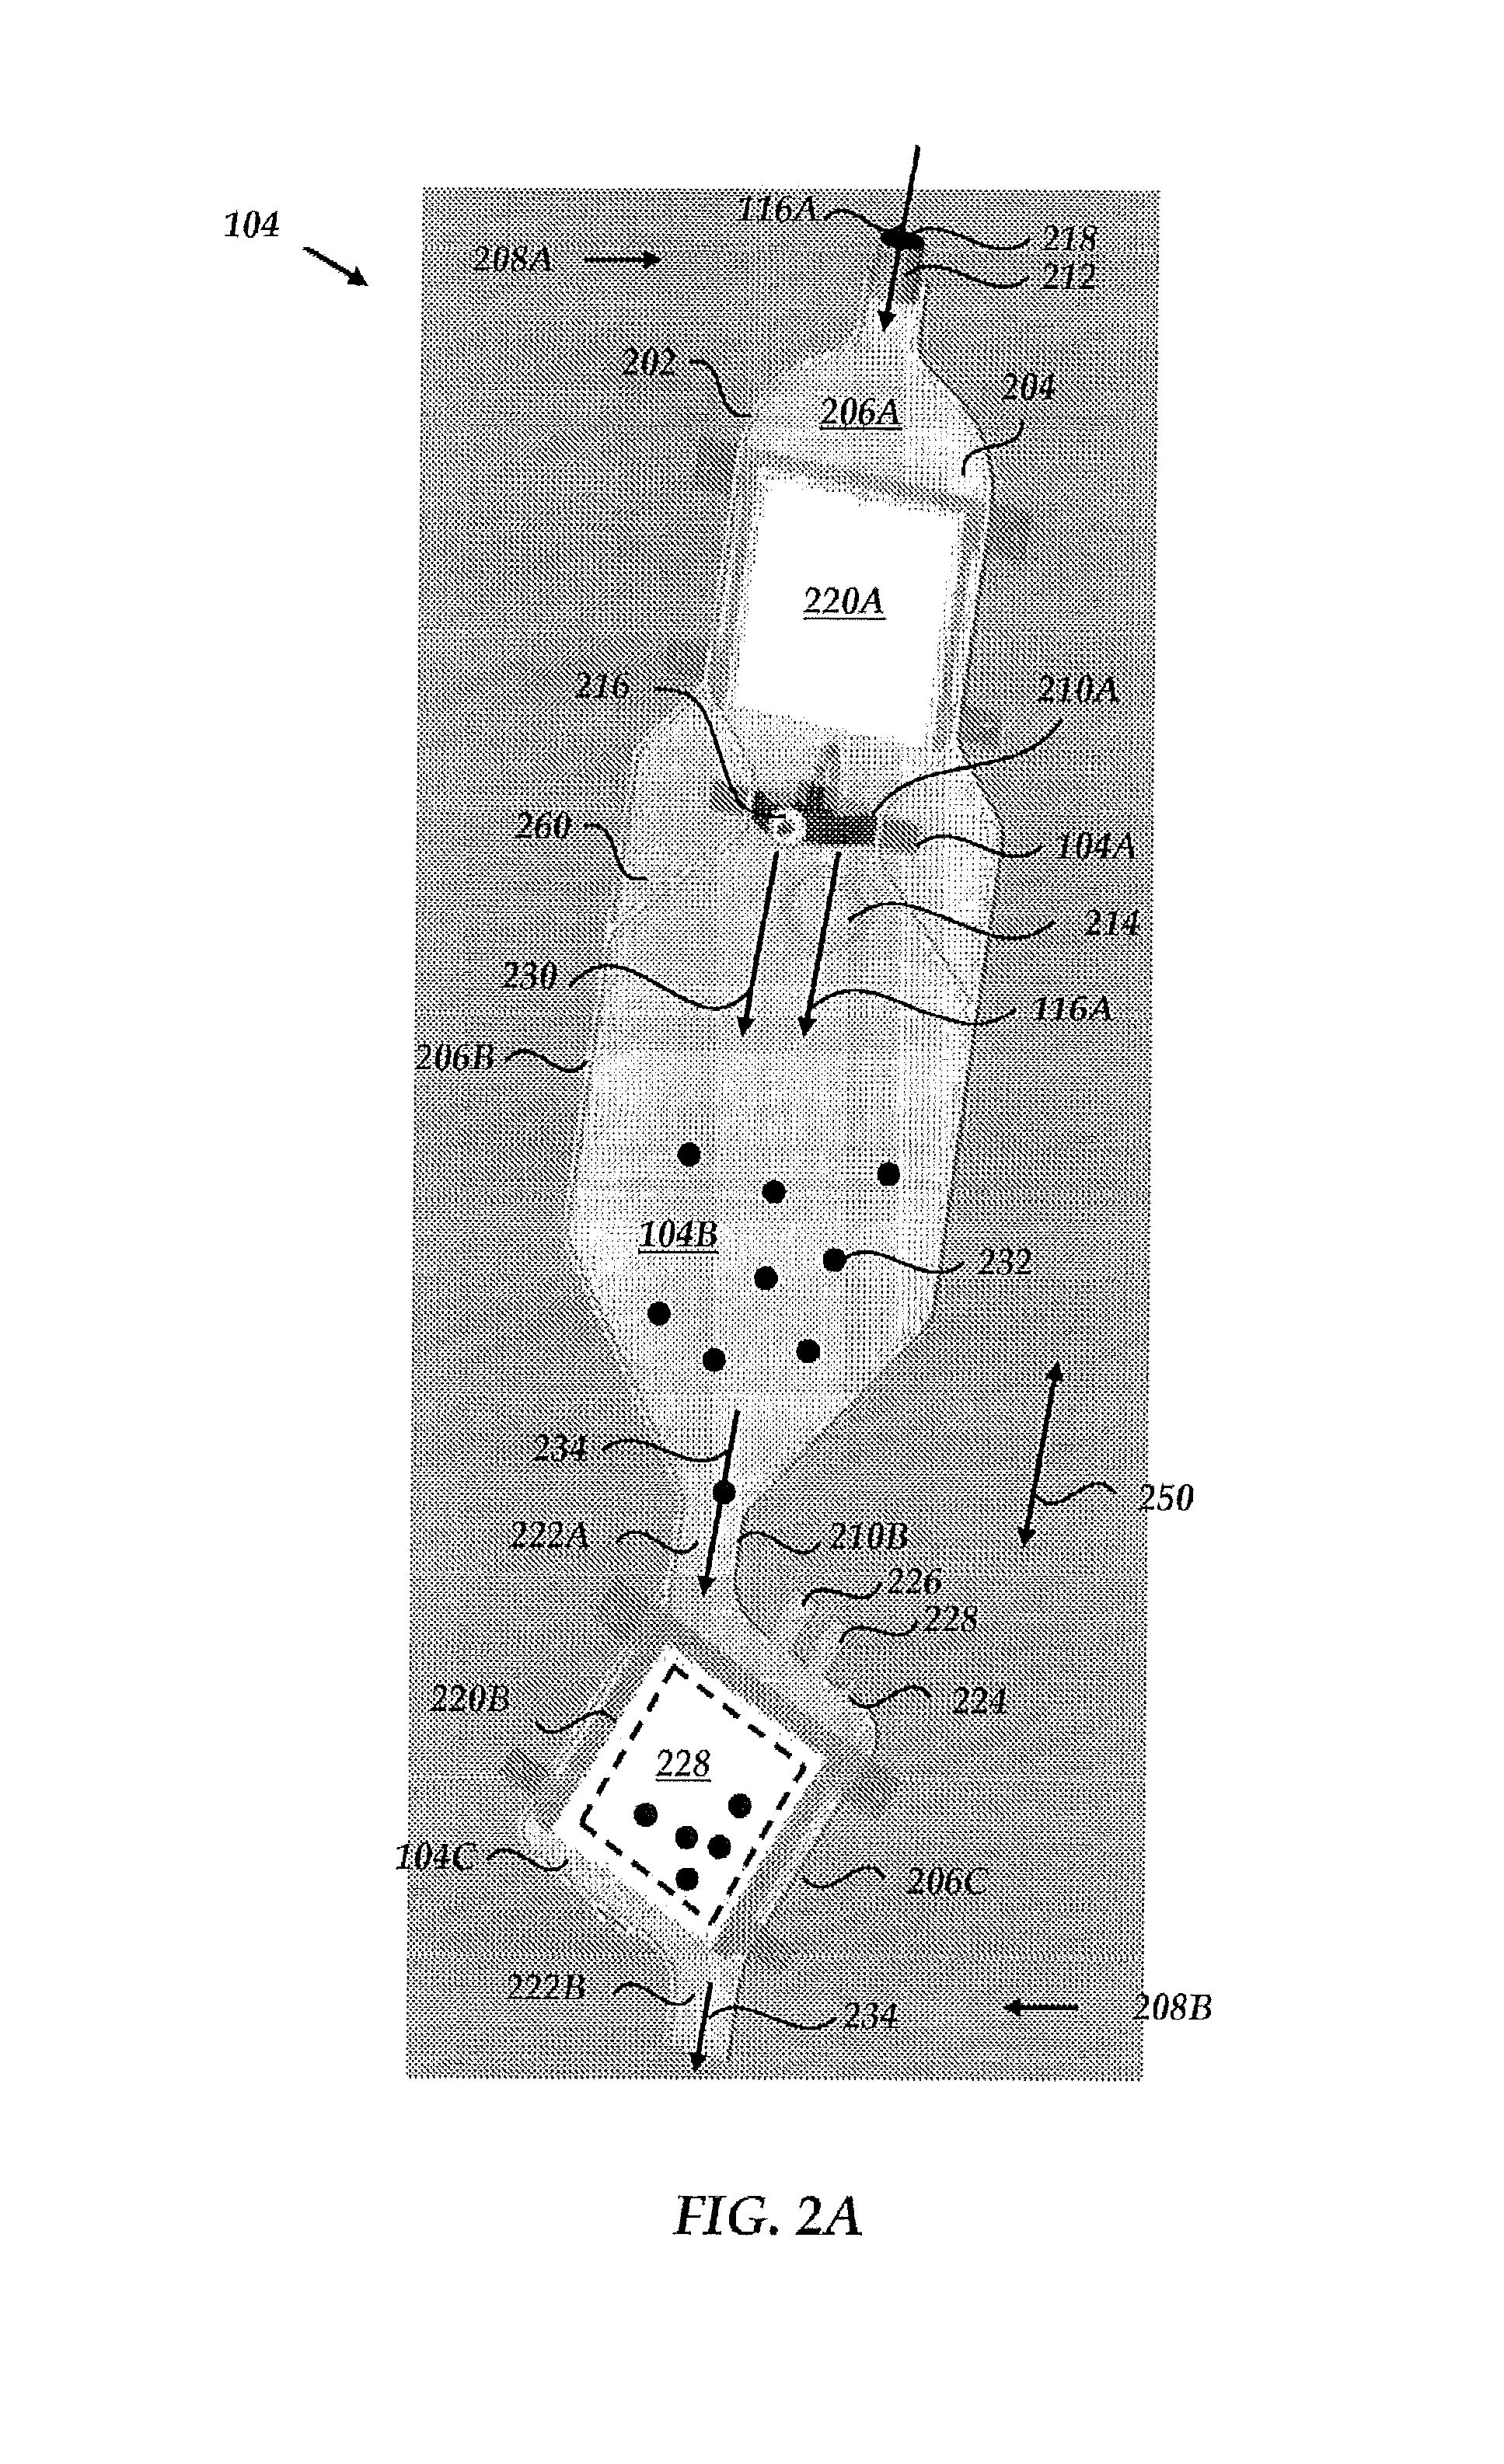 Formulations and methods for contemporaneous stabilization of active proteins during spray drying and storage